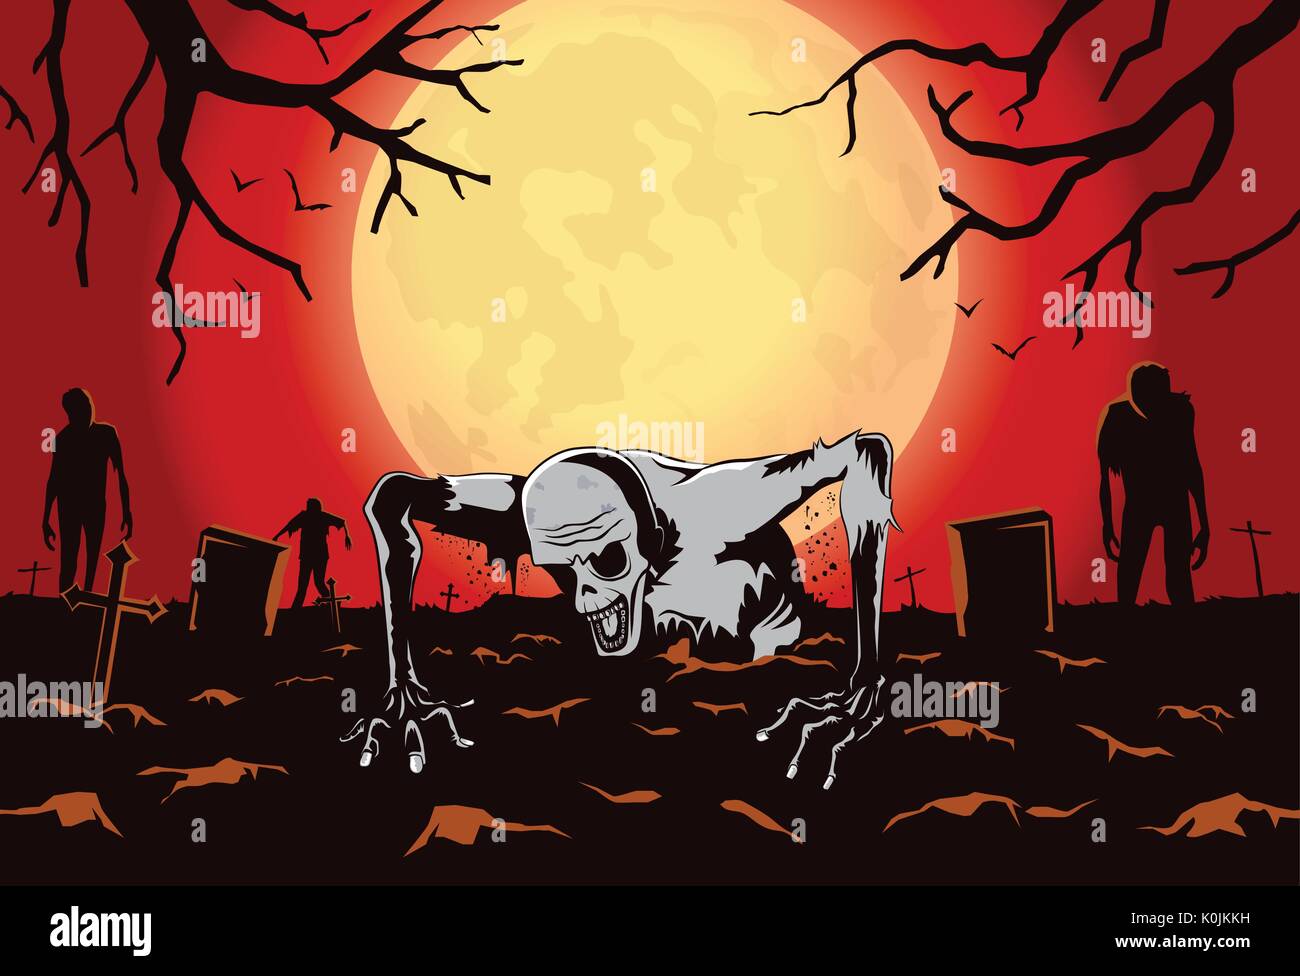 Zombie out of the grave on silhouette background in horror theme. Stock Vector